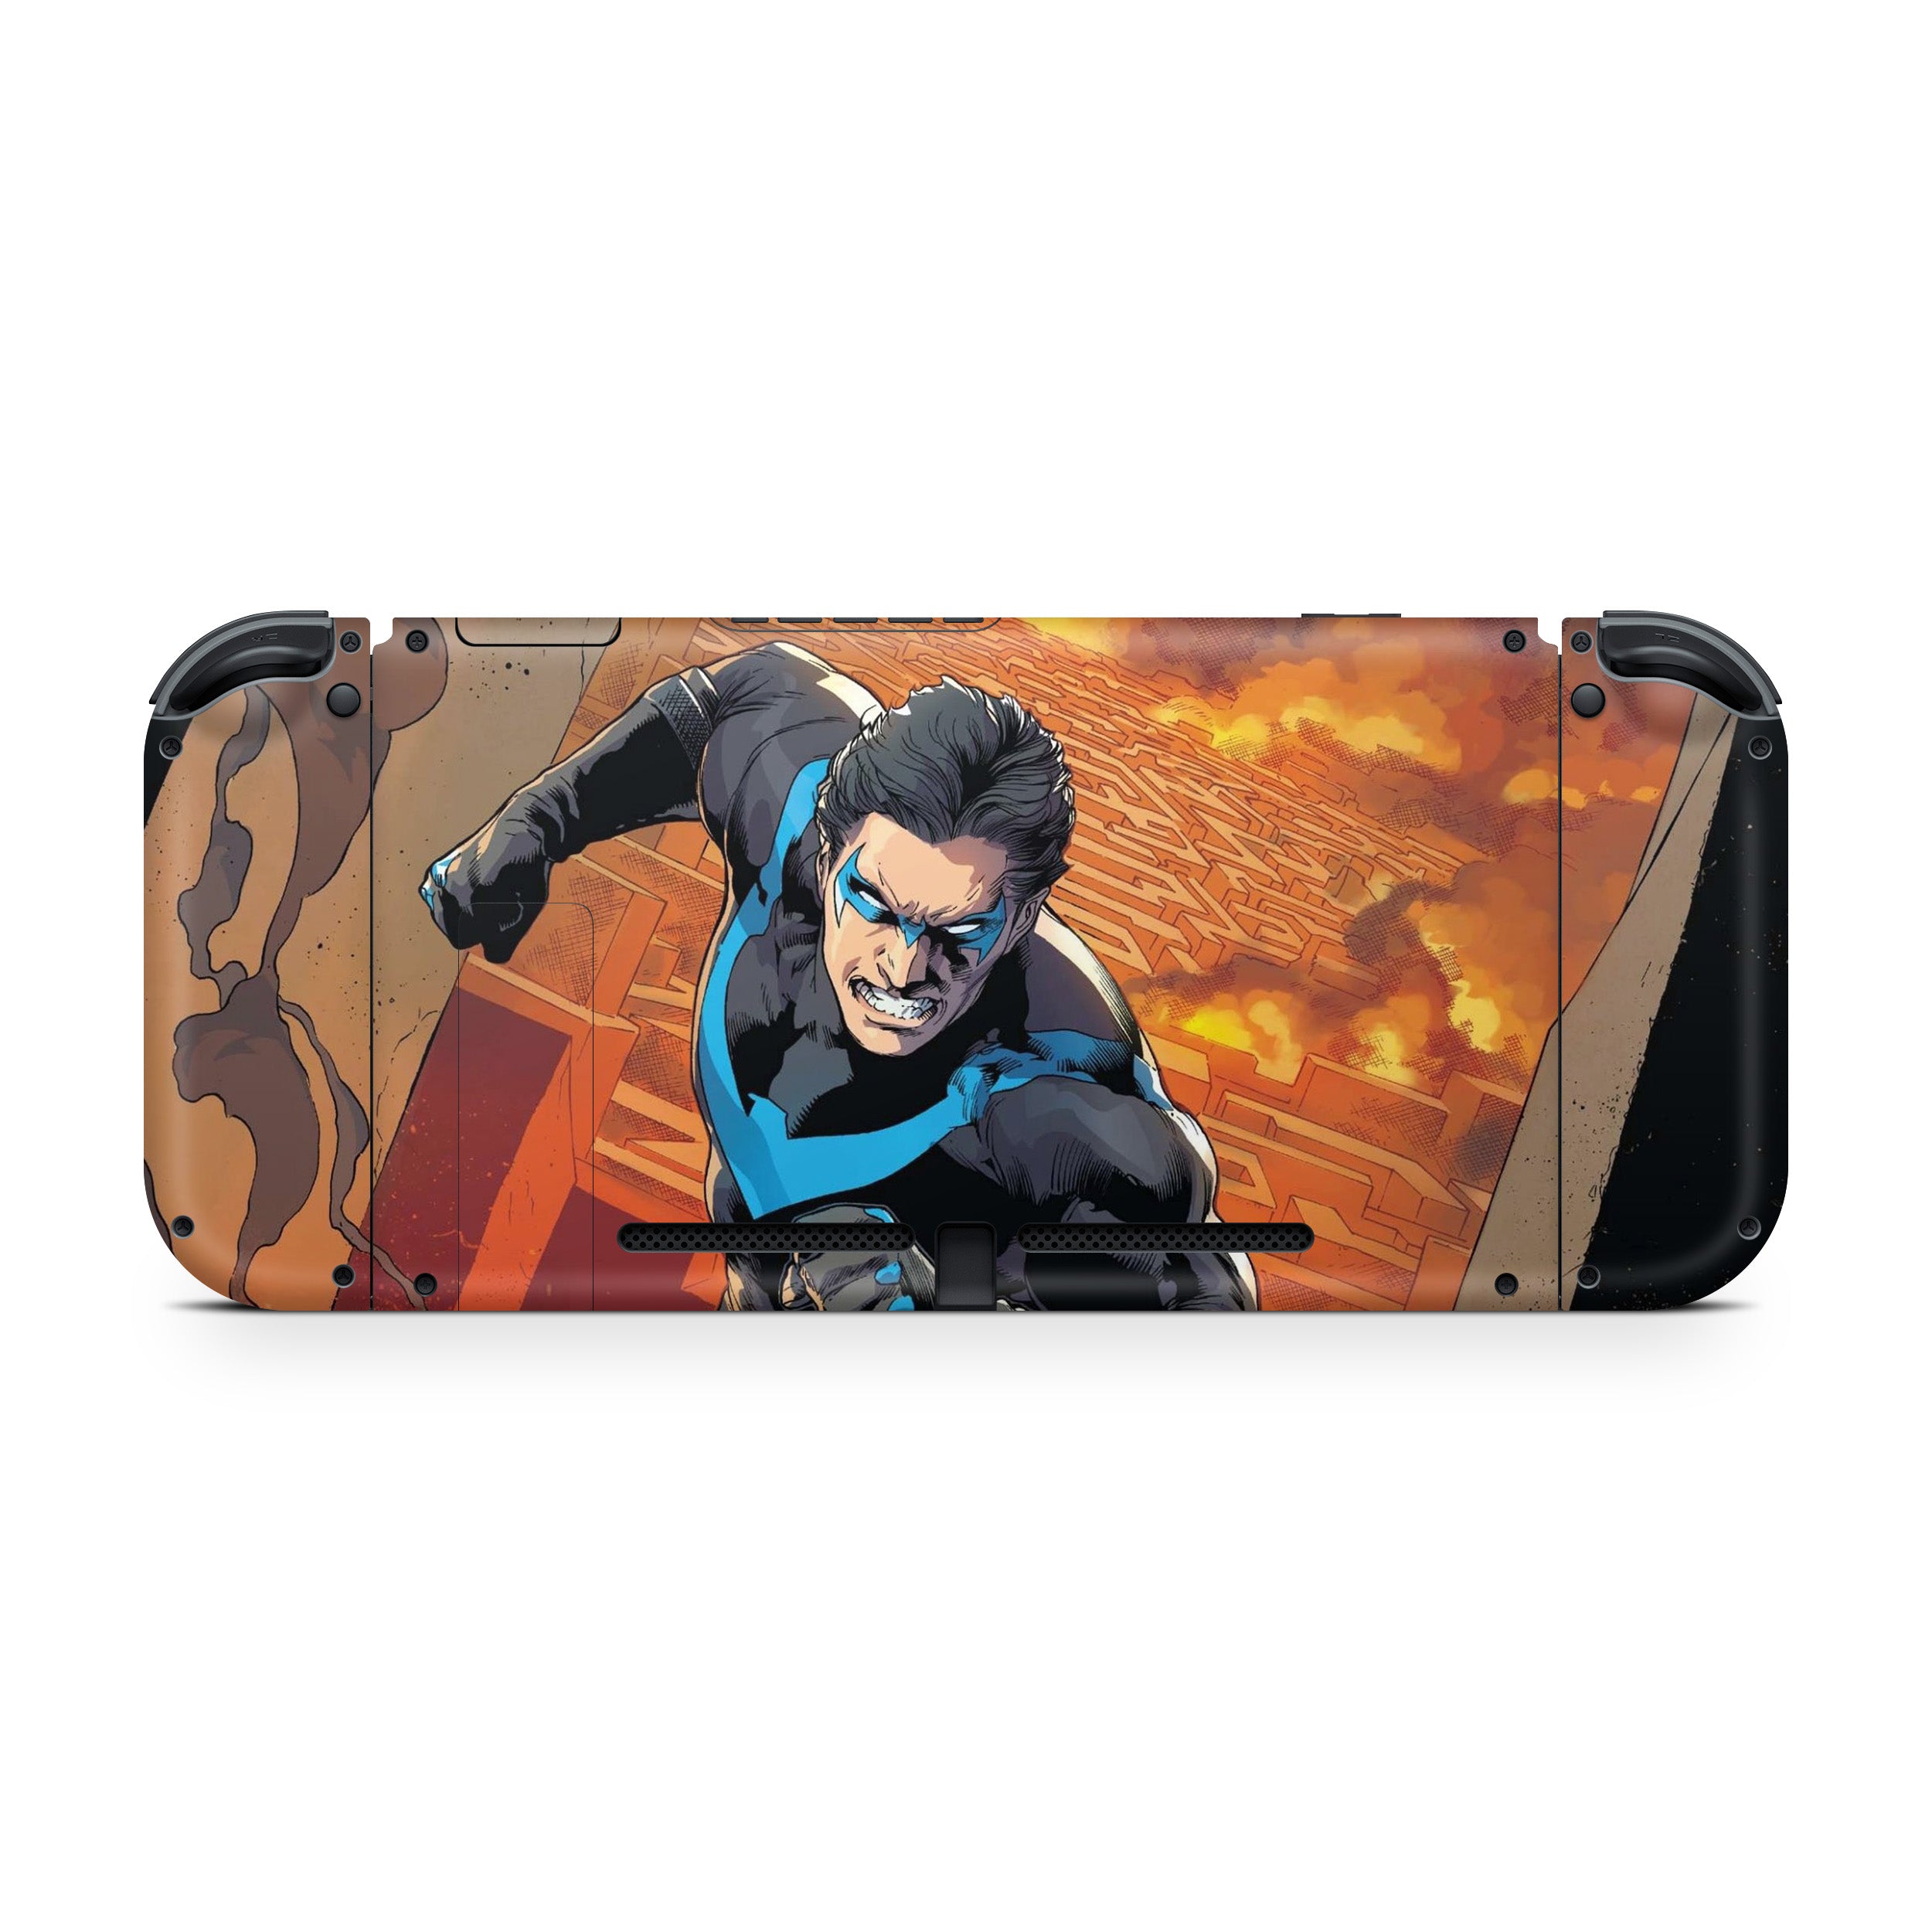 A video game skin featuring a DC Comics Nightwing design for the Nintendo Switch.